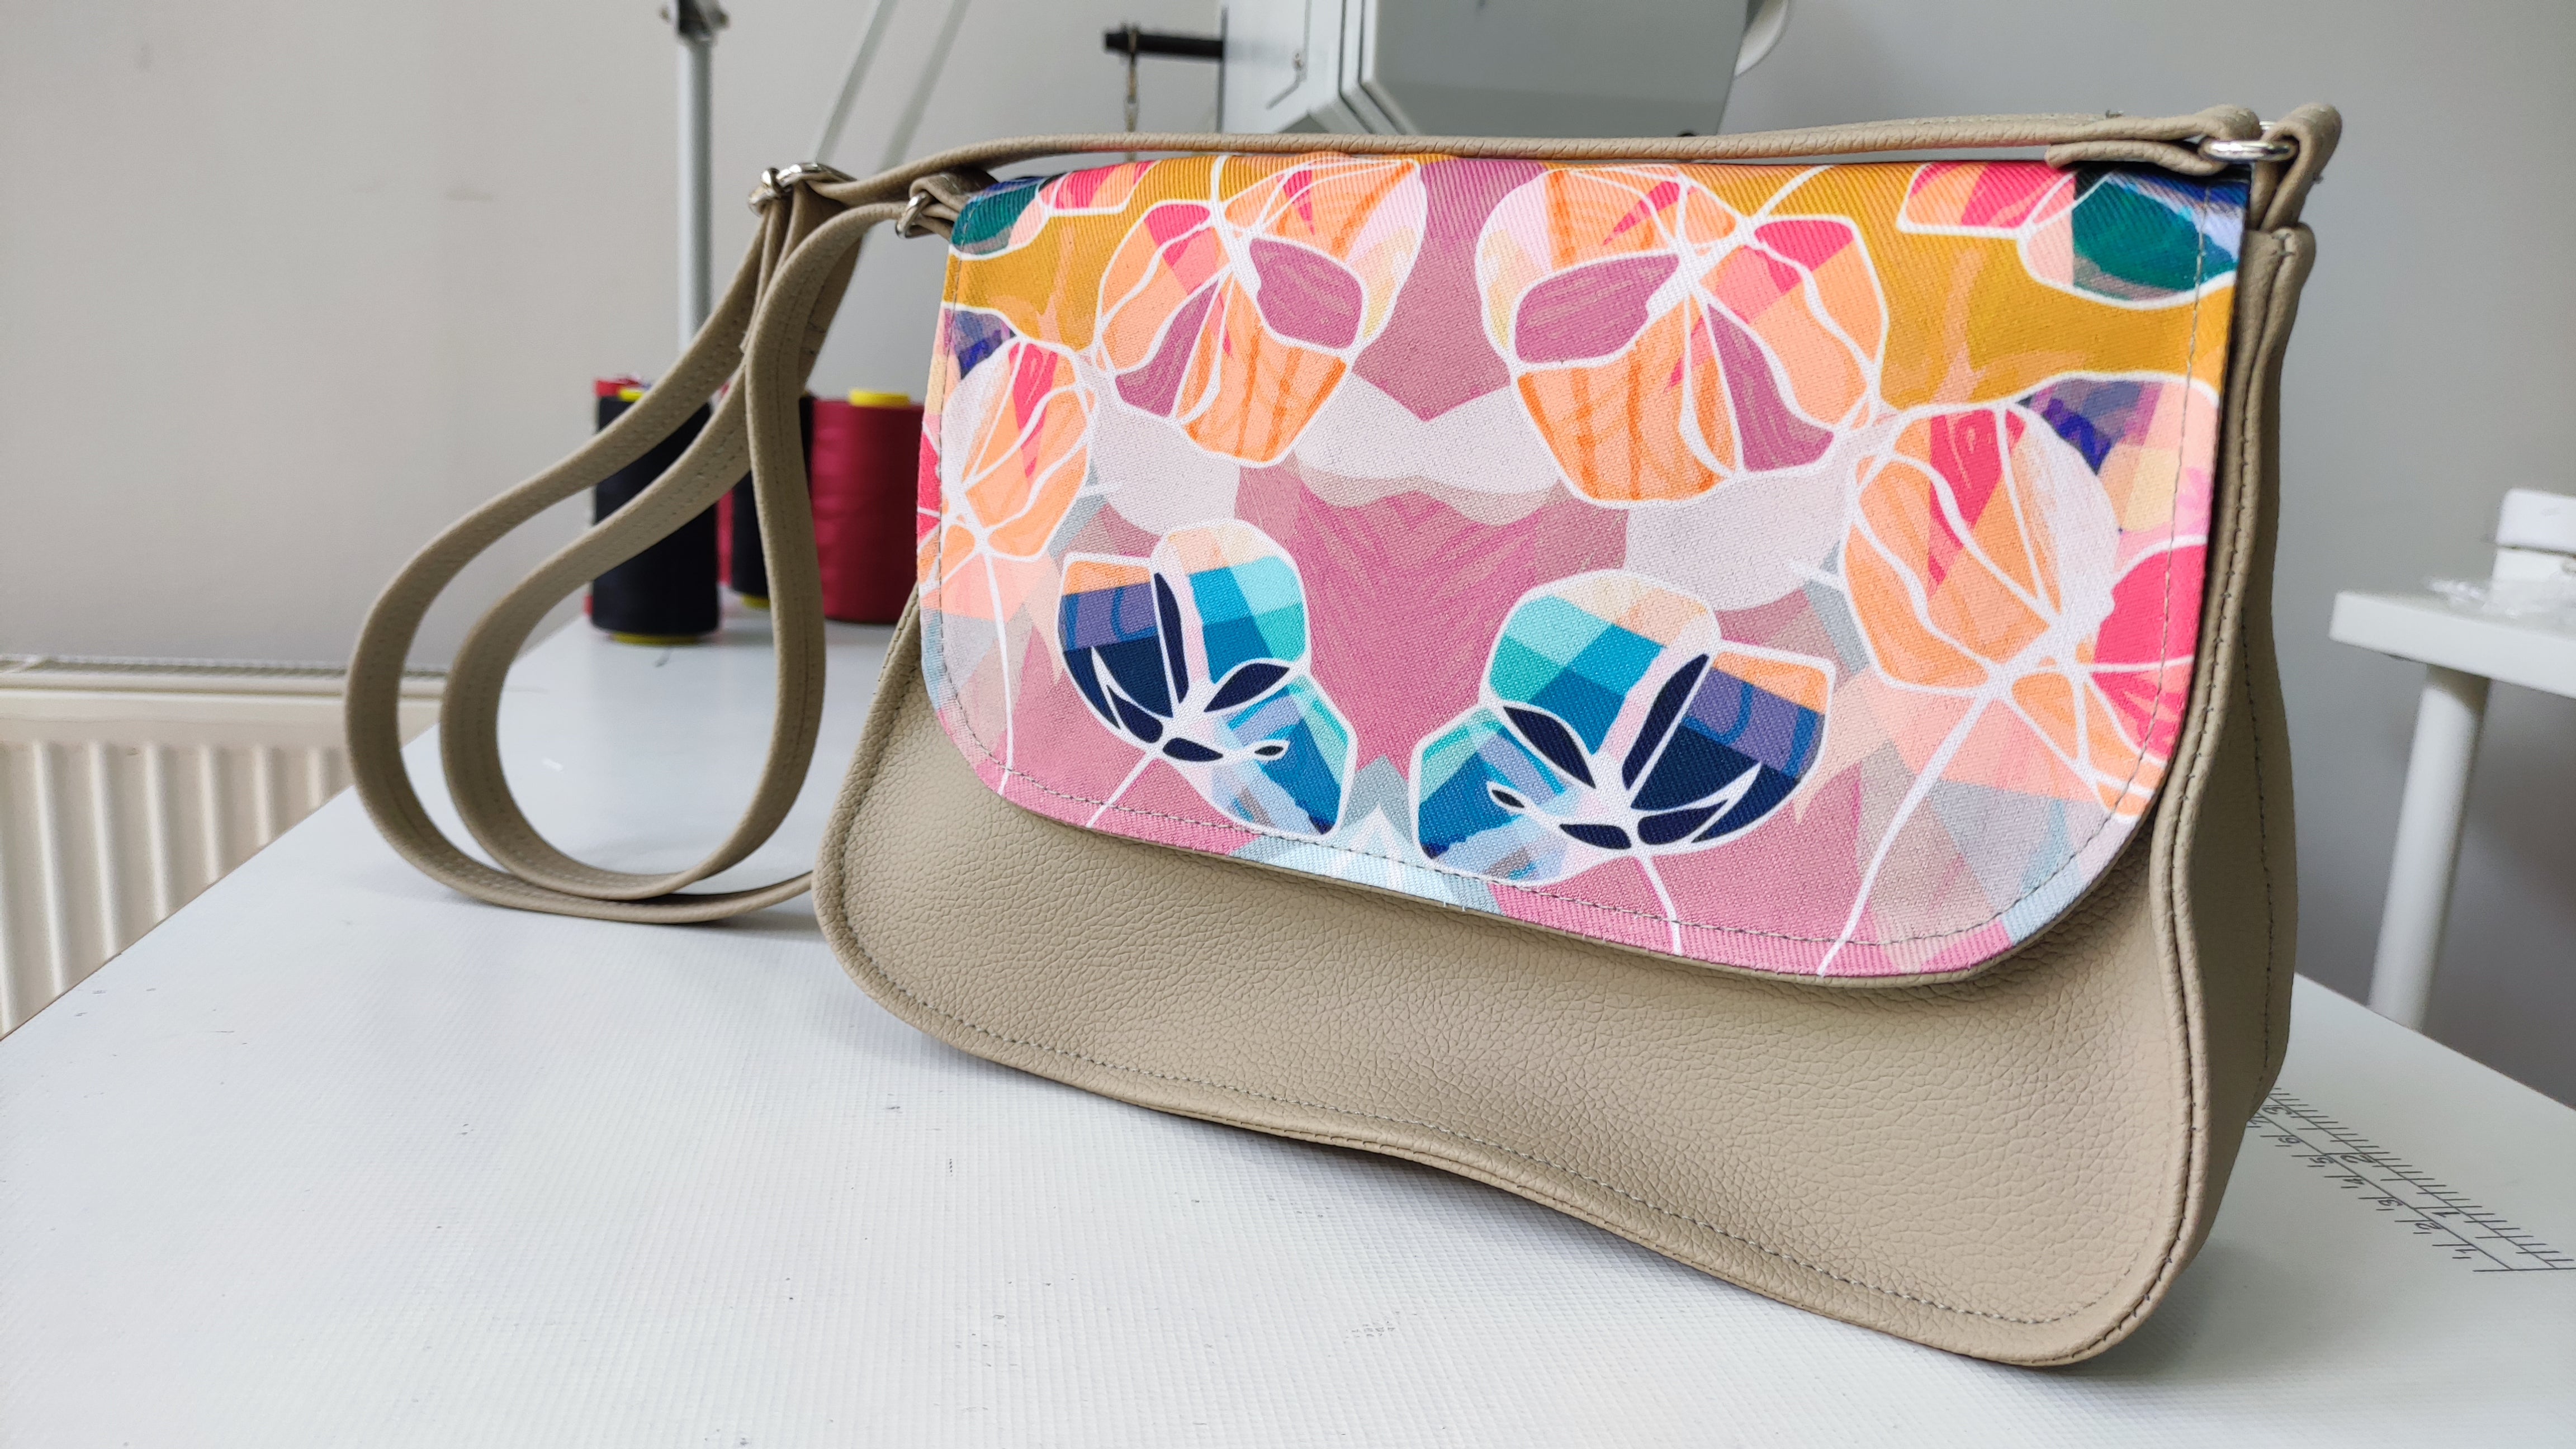 Bardo box bag - Colorful fantasy - Premium bardo box bag from spring - Just lvbeige, floral, flowers, gift, handemade, leaves, nature, vegan leather, woman52! Shop now at BARDO ART WORKS